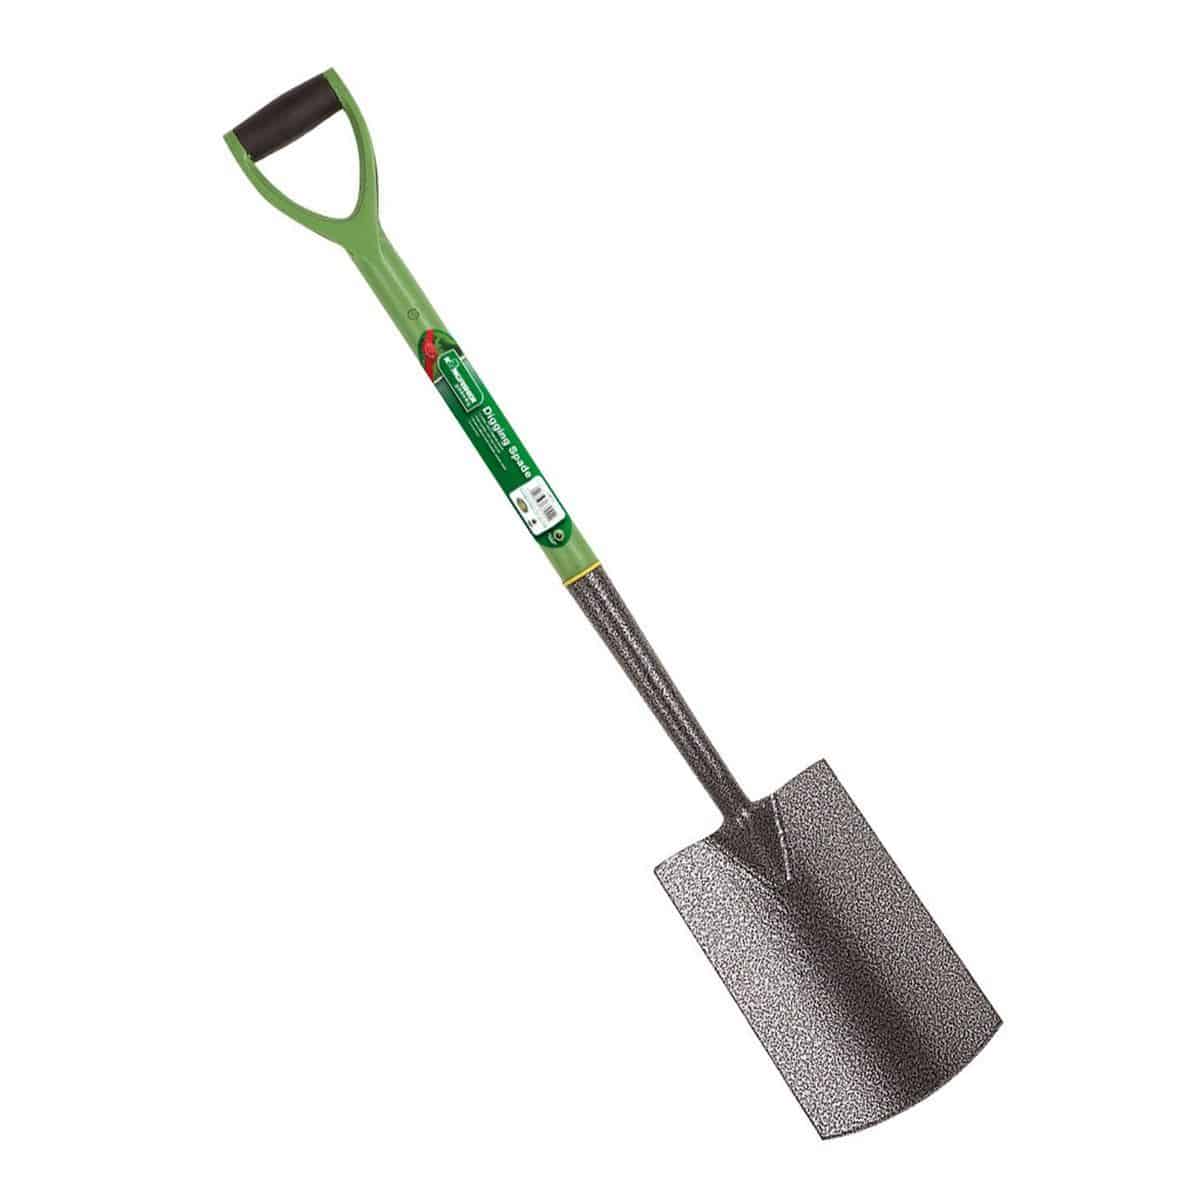 5 Useful Tools that Can Help You in Gardening: Shovel 